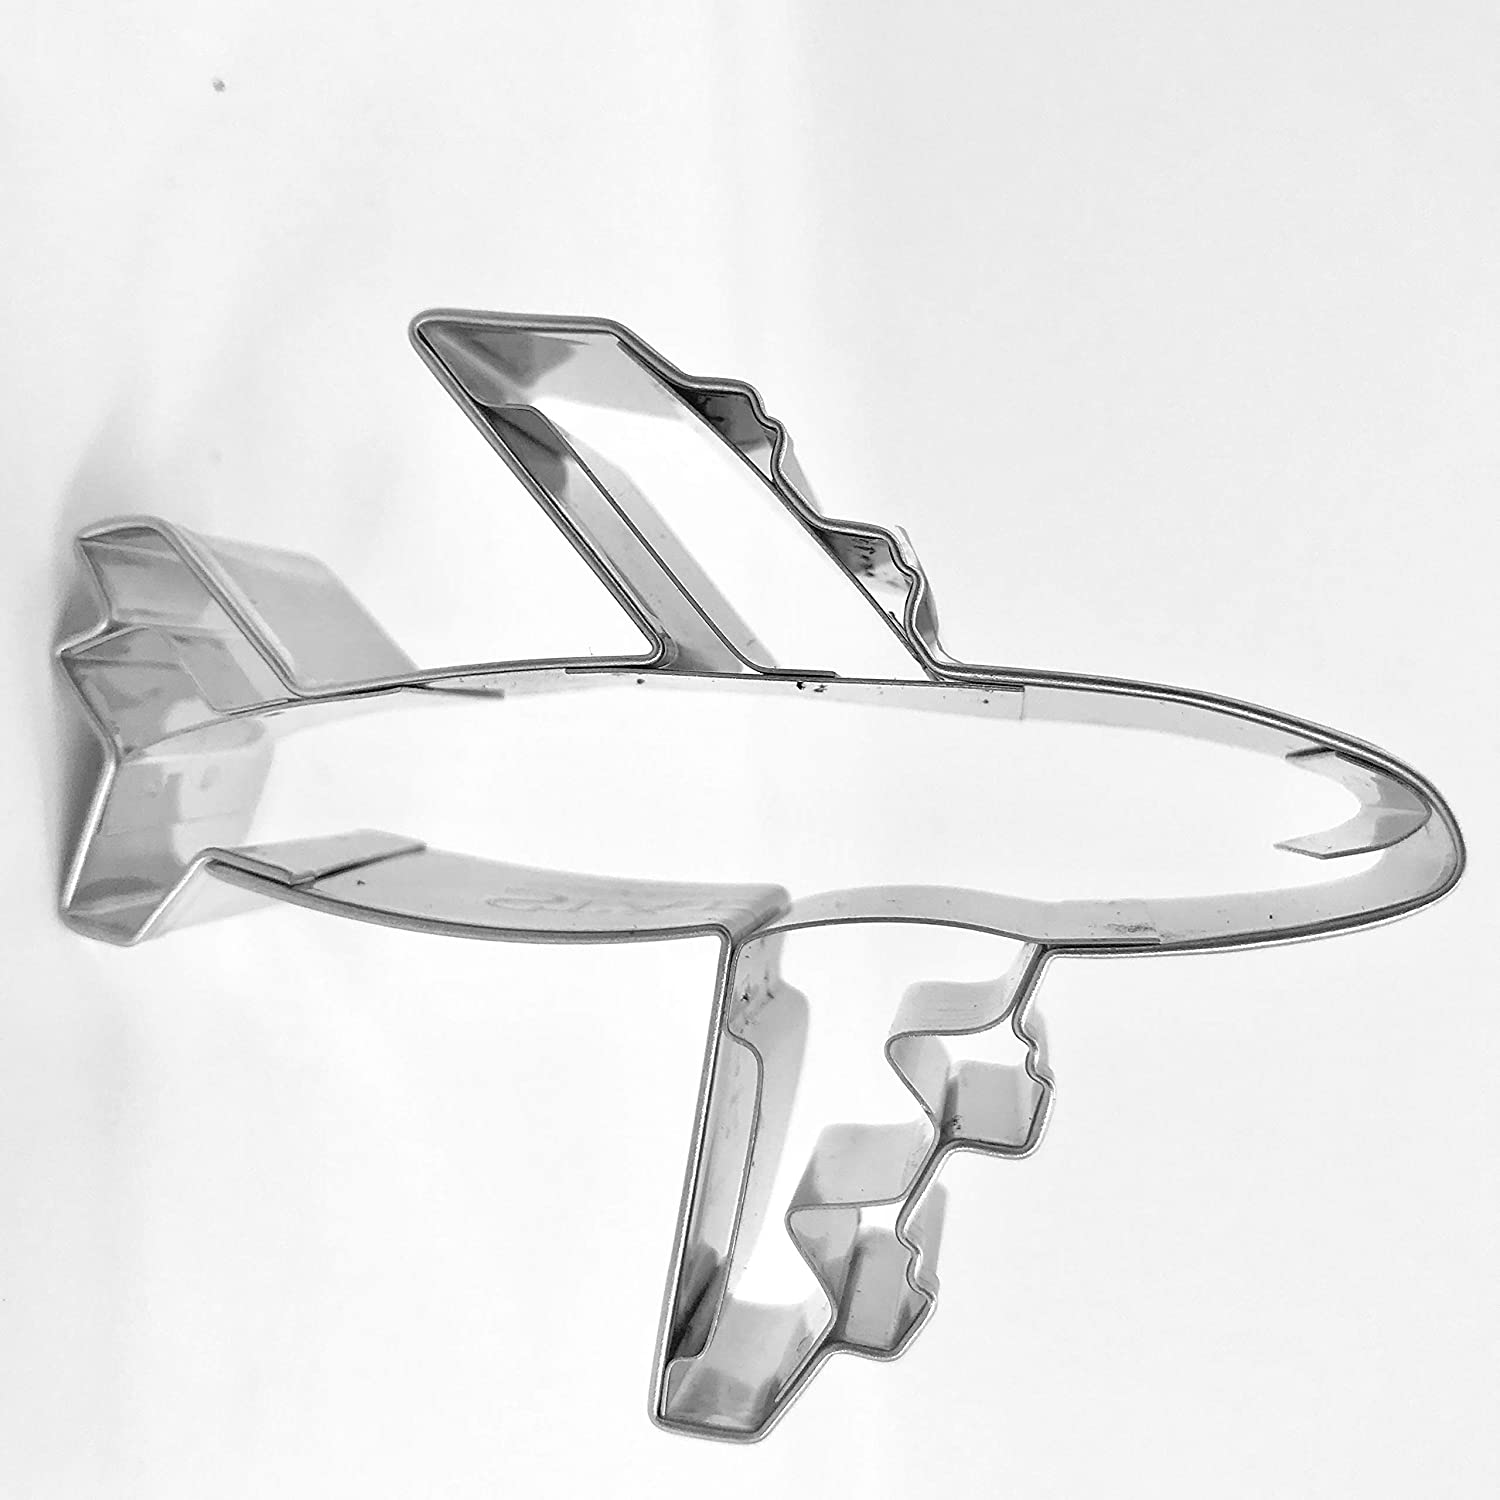 Staedter Städter ST083035 Tin Airplane Cookie Cutter Approximately 6 cm